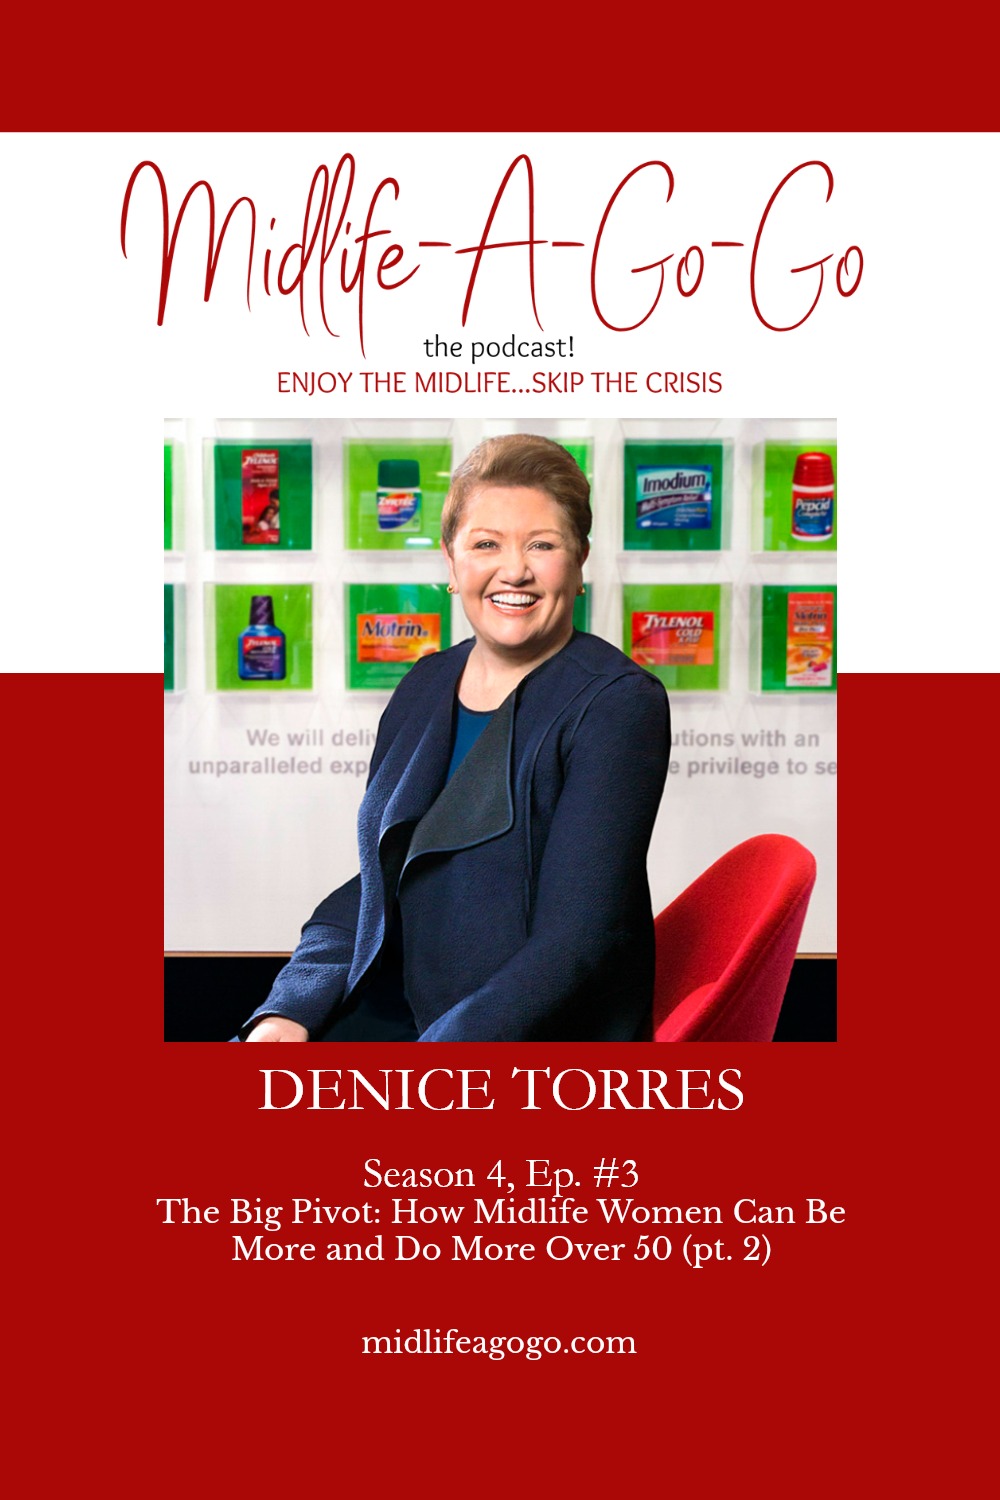 The Big Pivot: How Midlife Women Can Be More and Do More Over 50 pt. 2 with Denice Torres